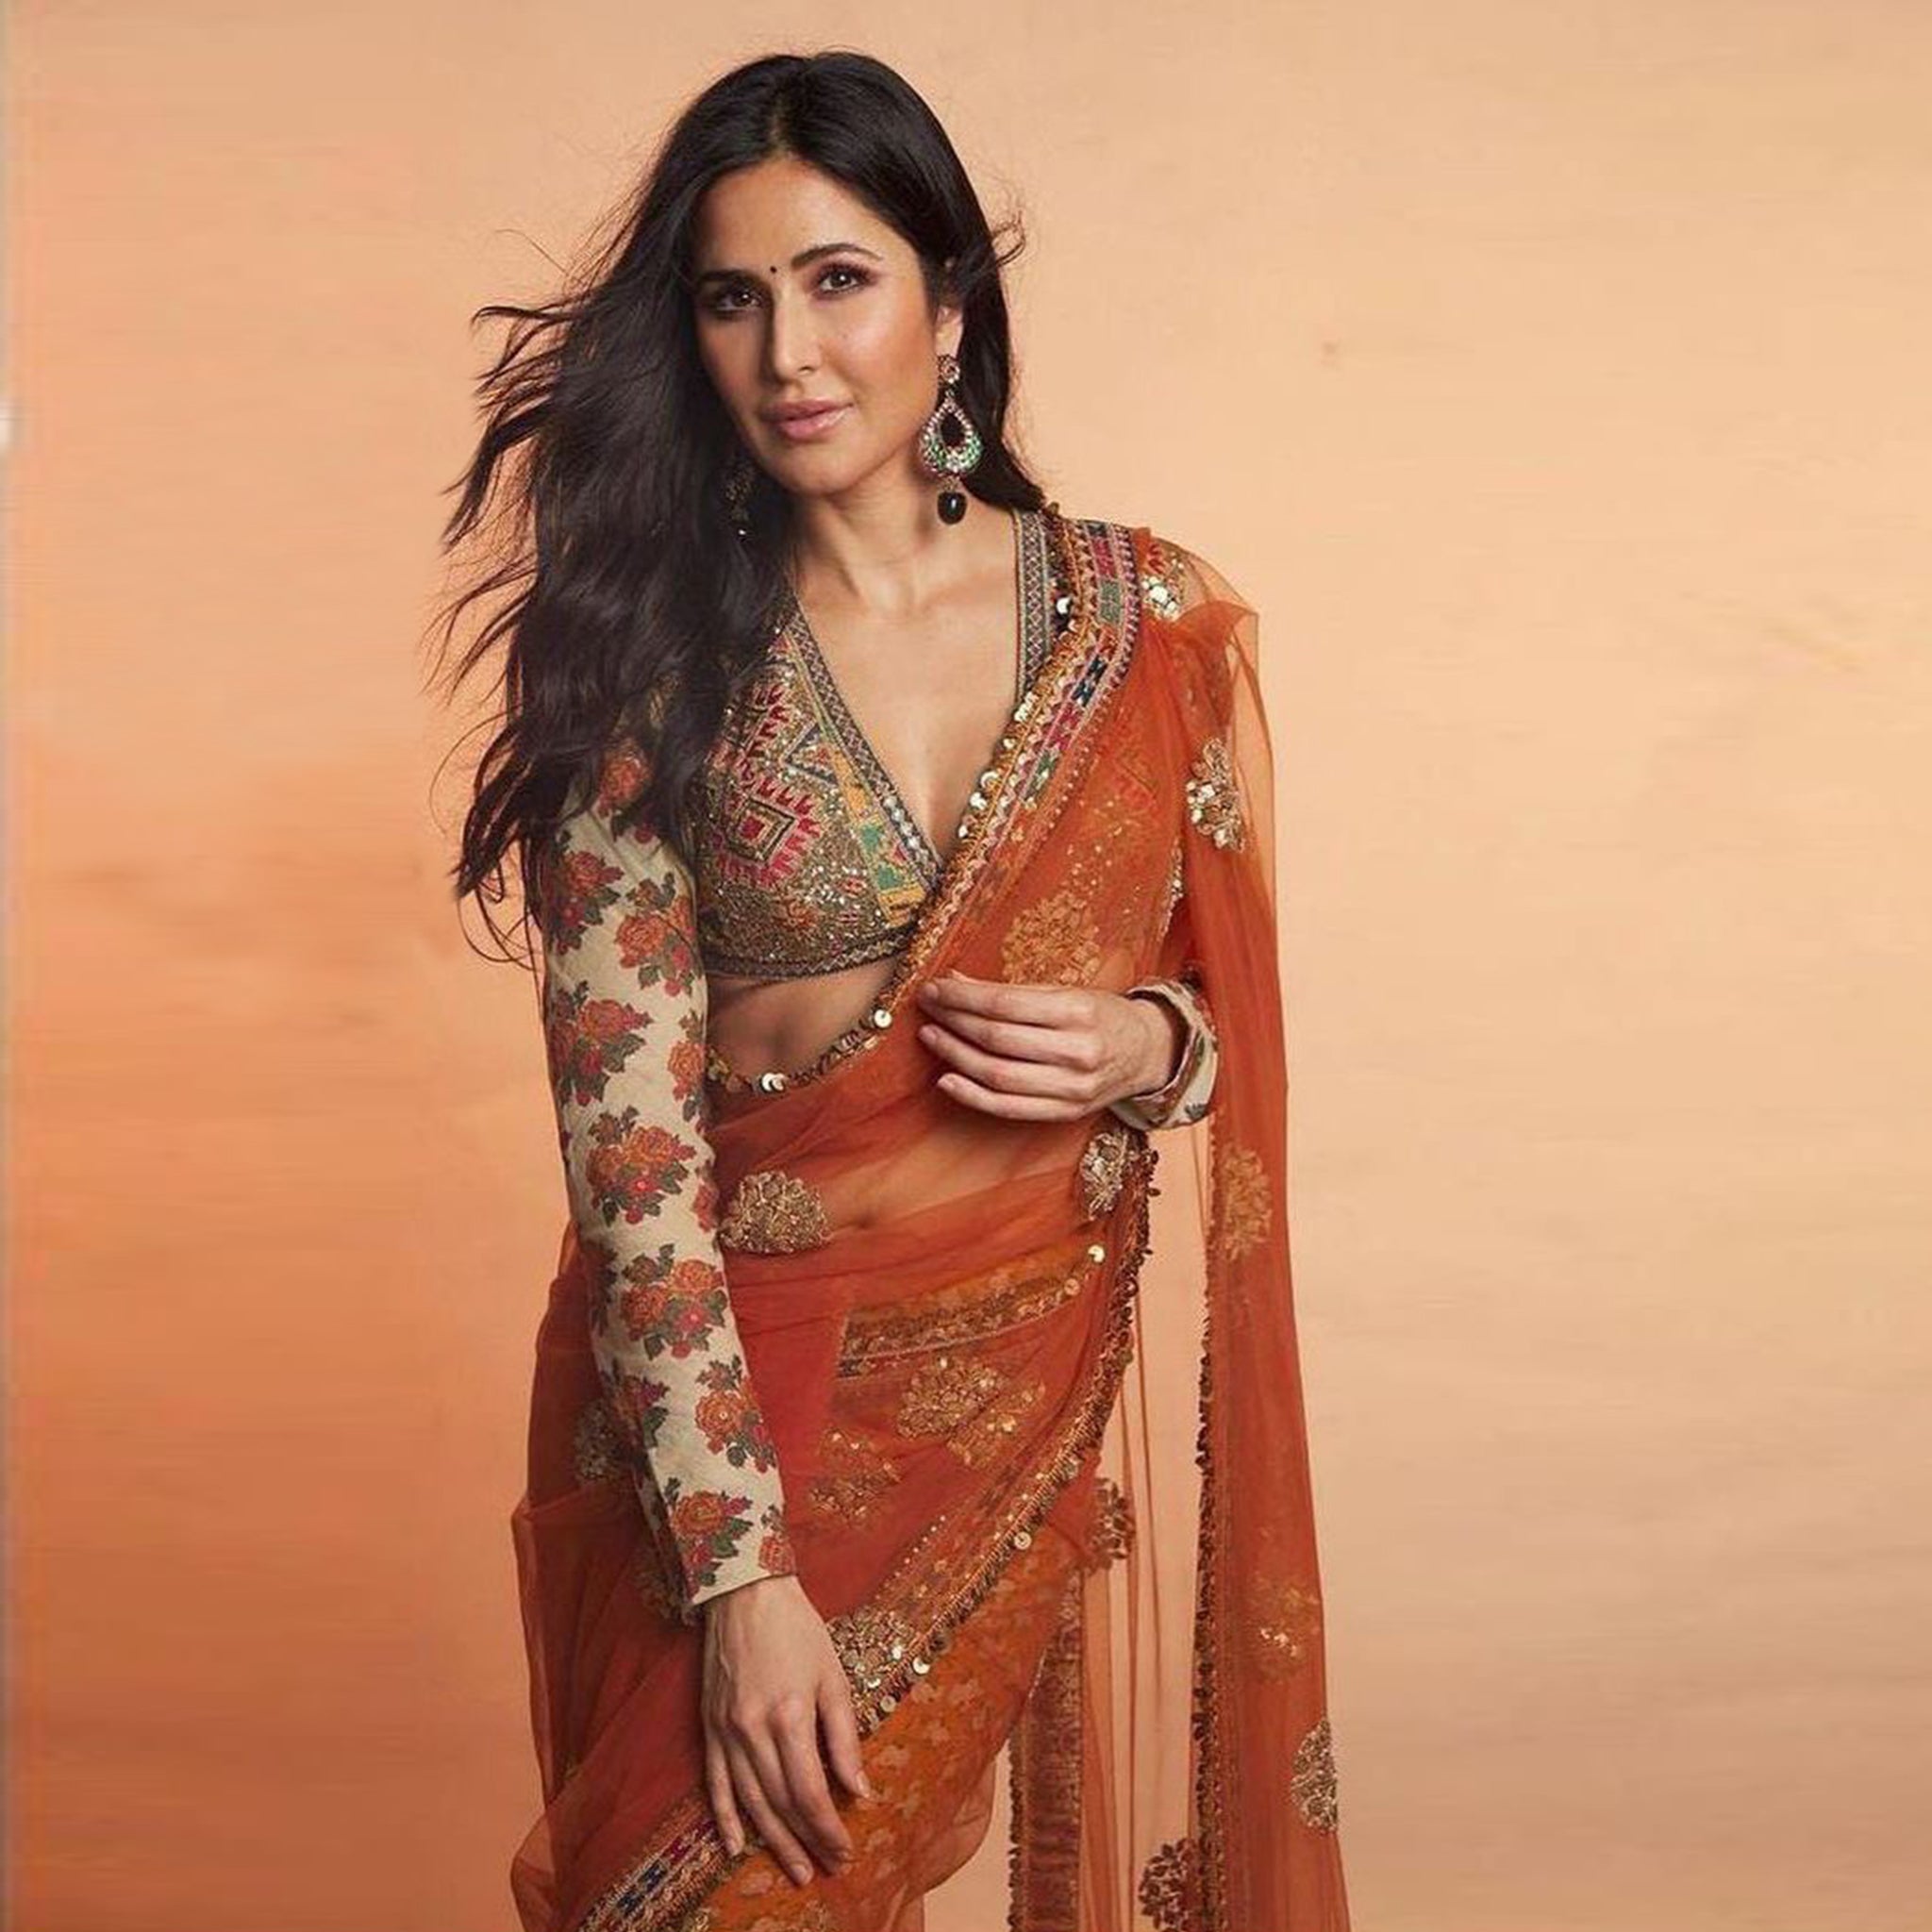 Orange Saree in Net with Sequence Work with Printed Petticoat - Colorful Saree